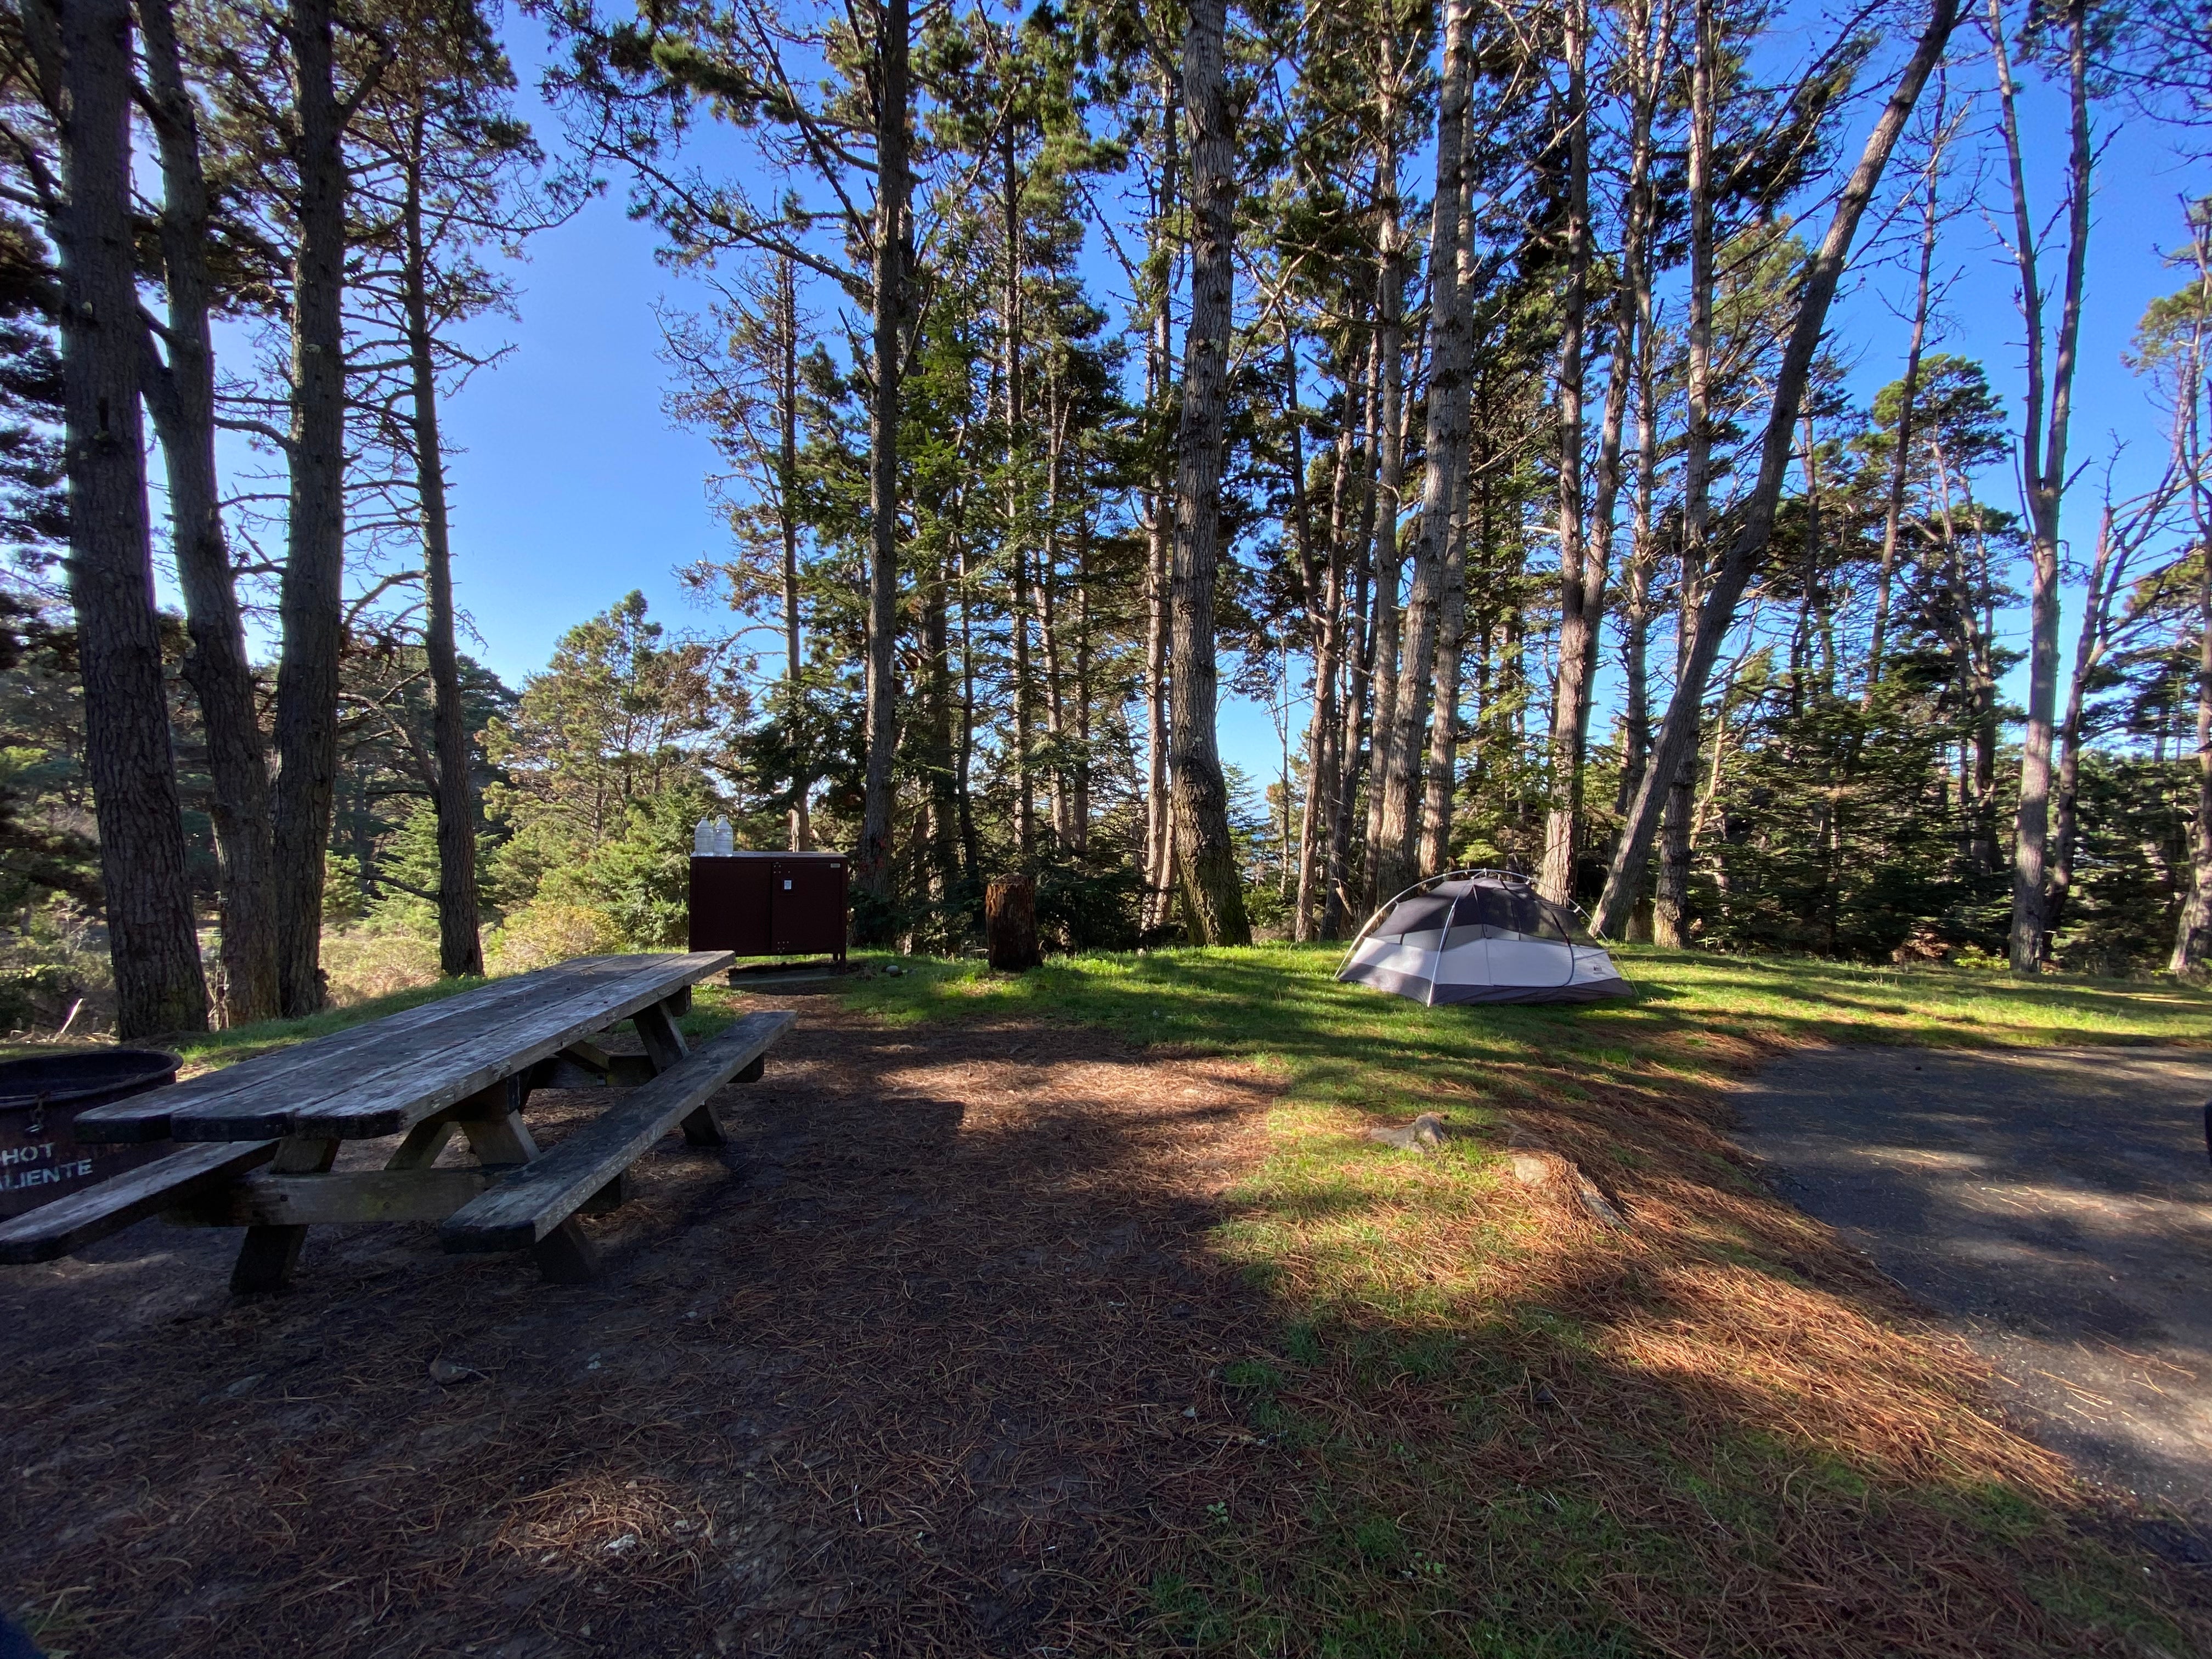 Camper submitted image from Stillwater Cove Regional Park - 4